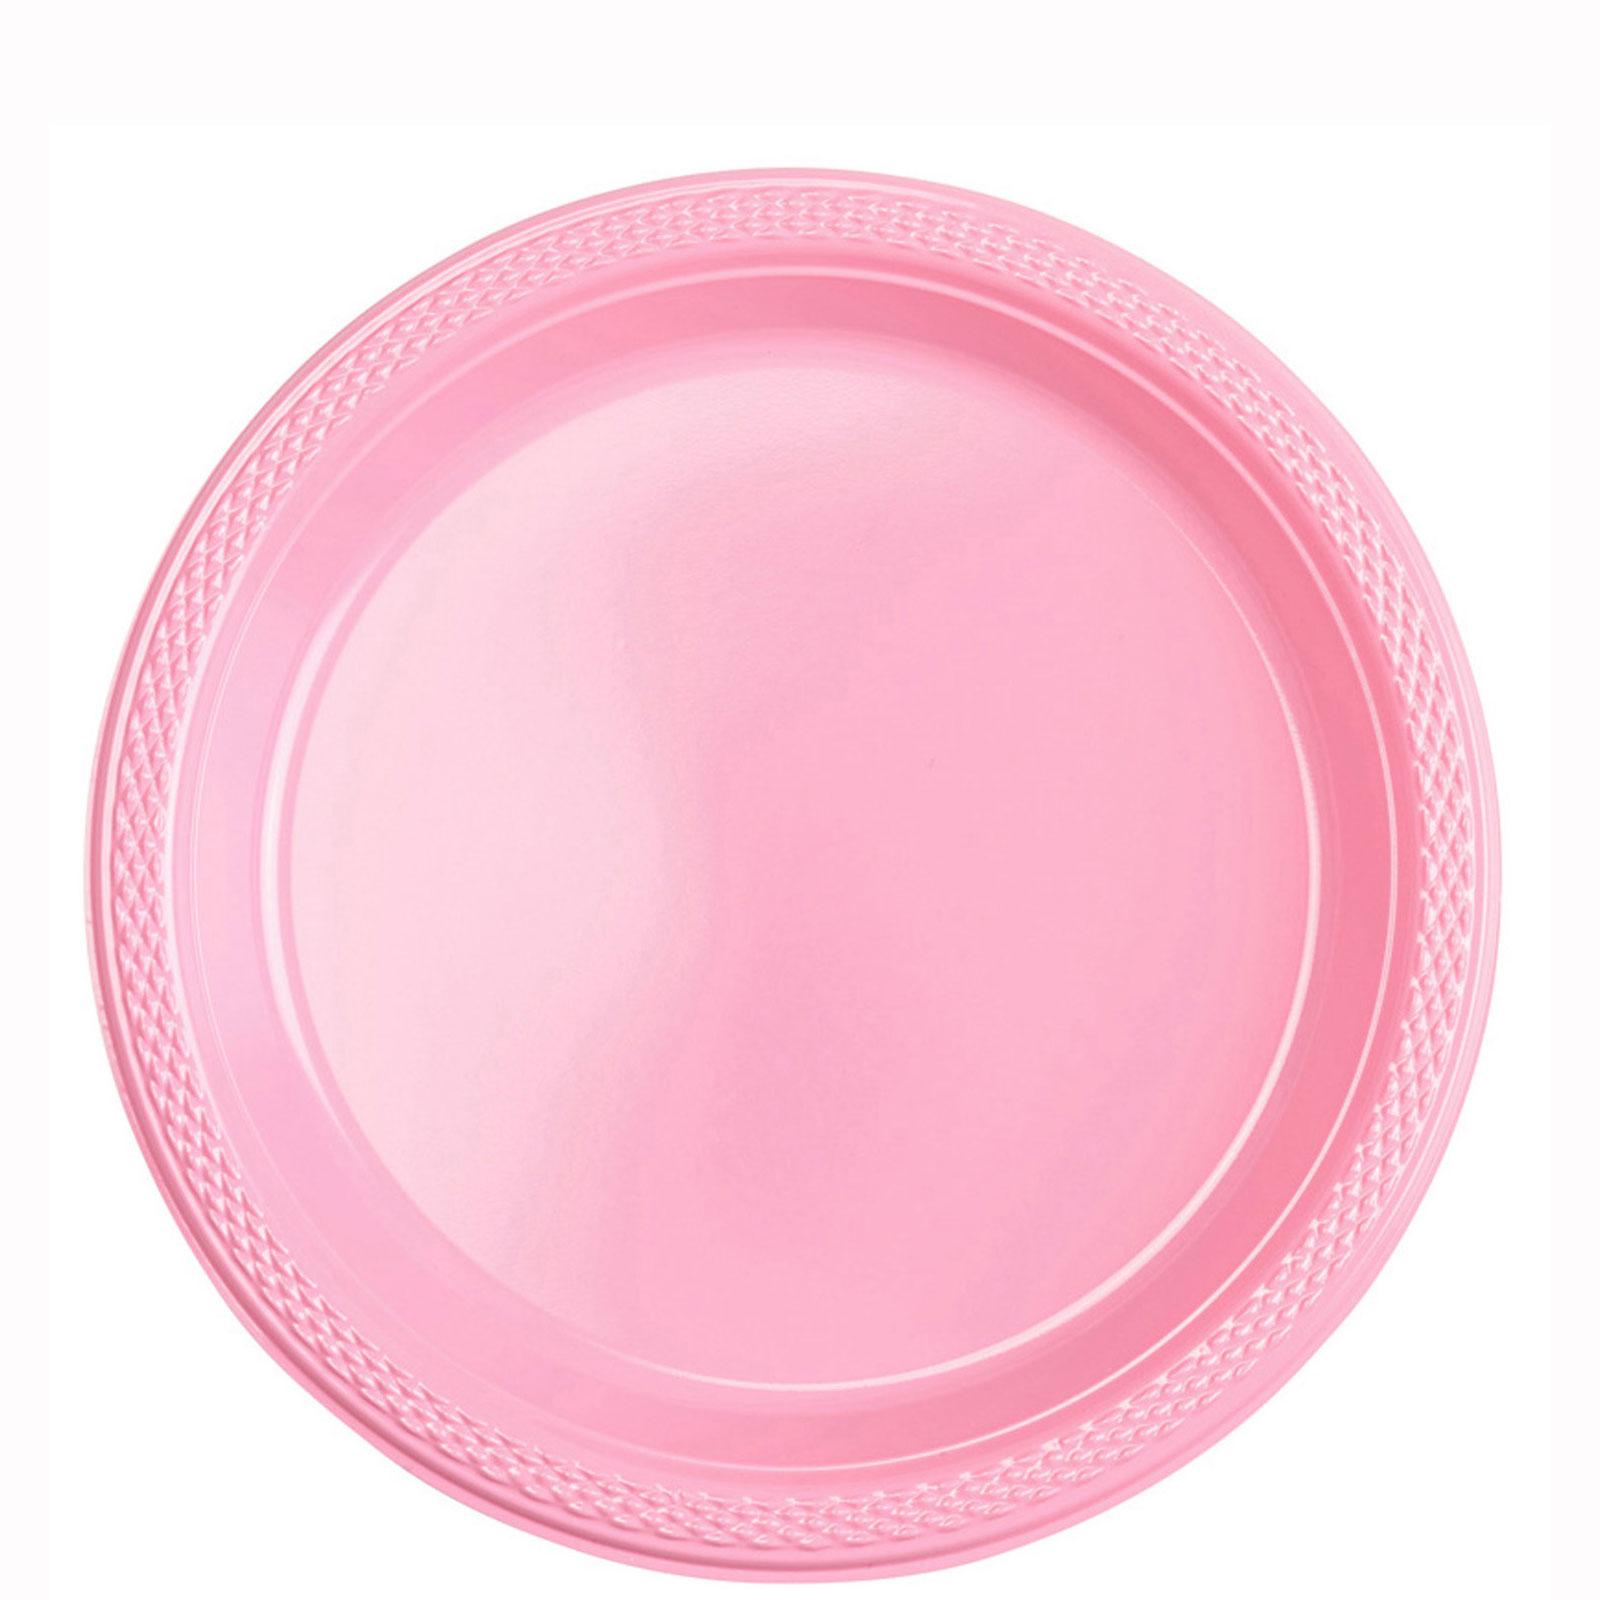 New Pink Plastic Plates 9in, 20pcs Solid Tableware - Party Centre